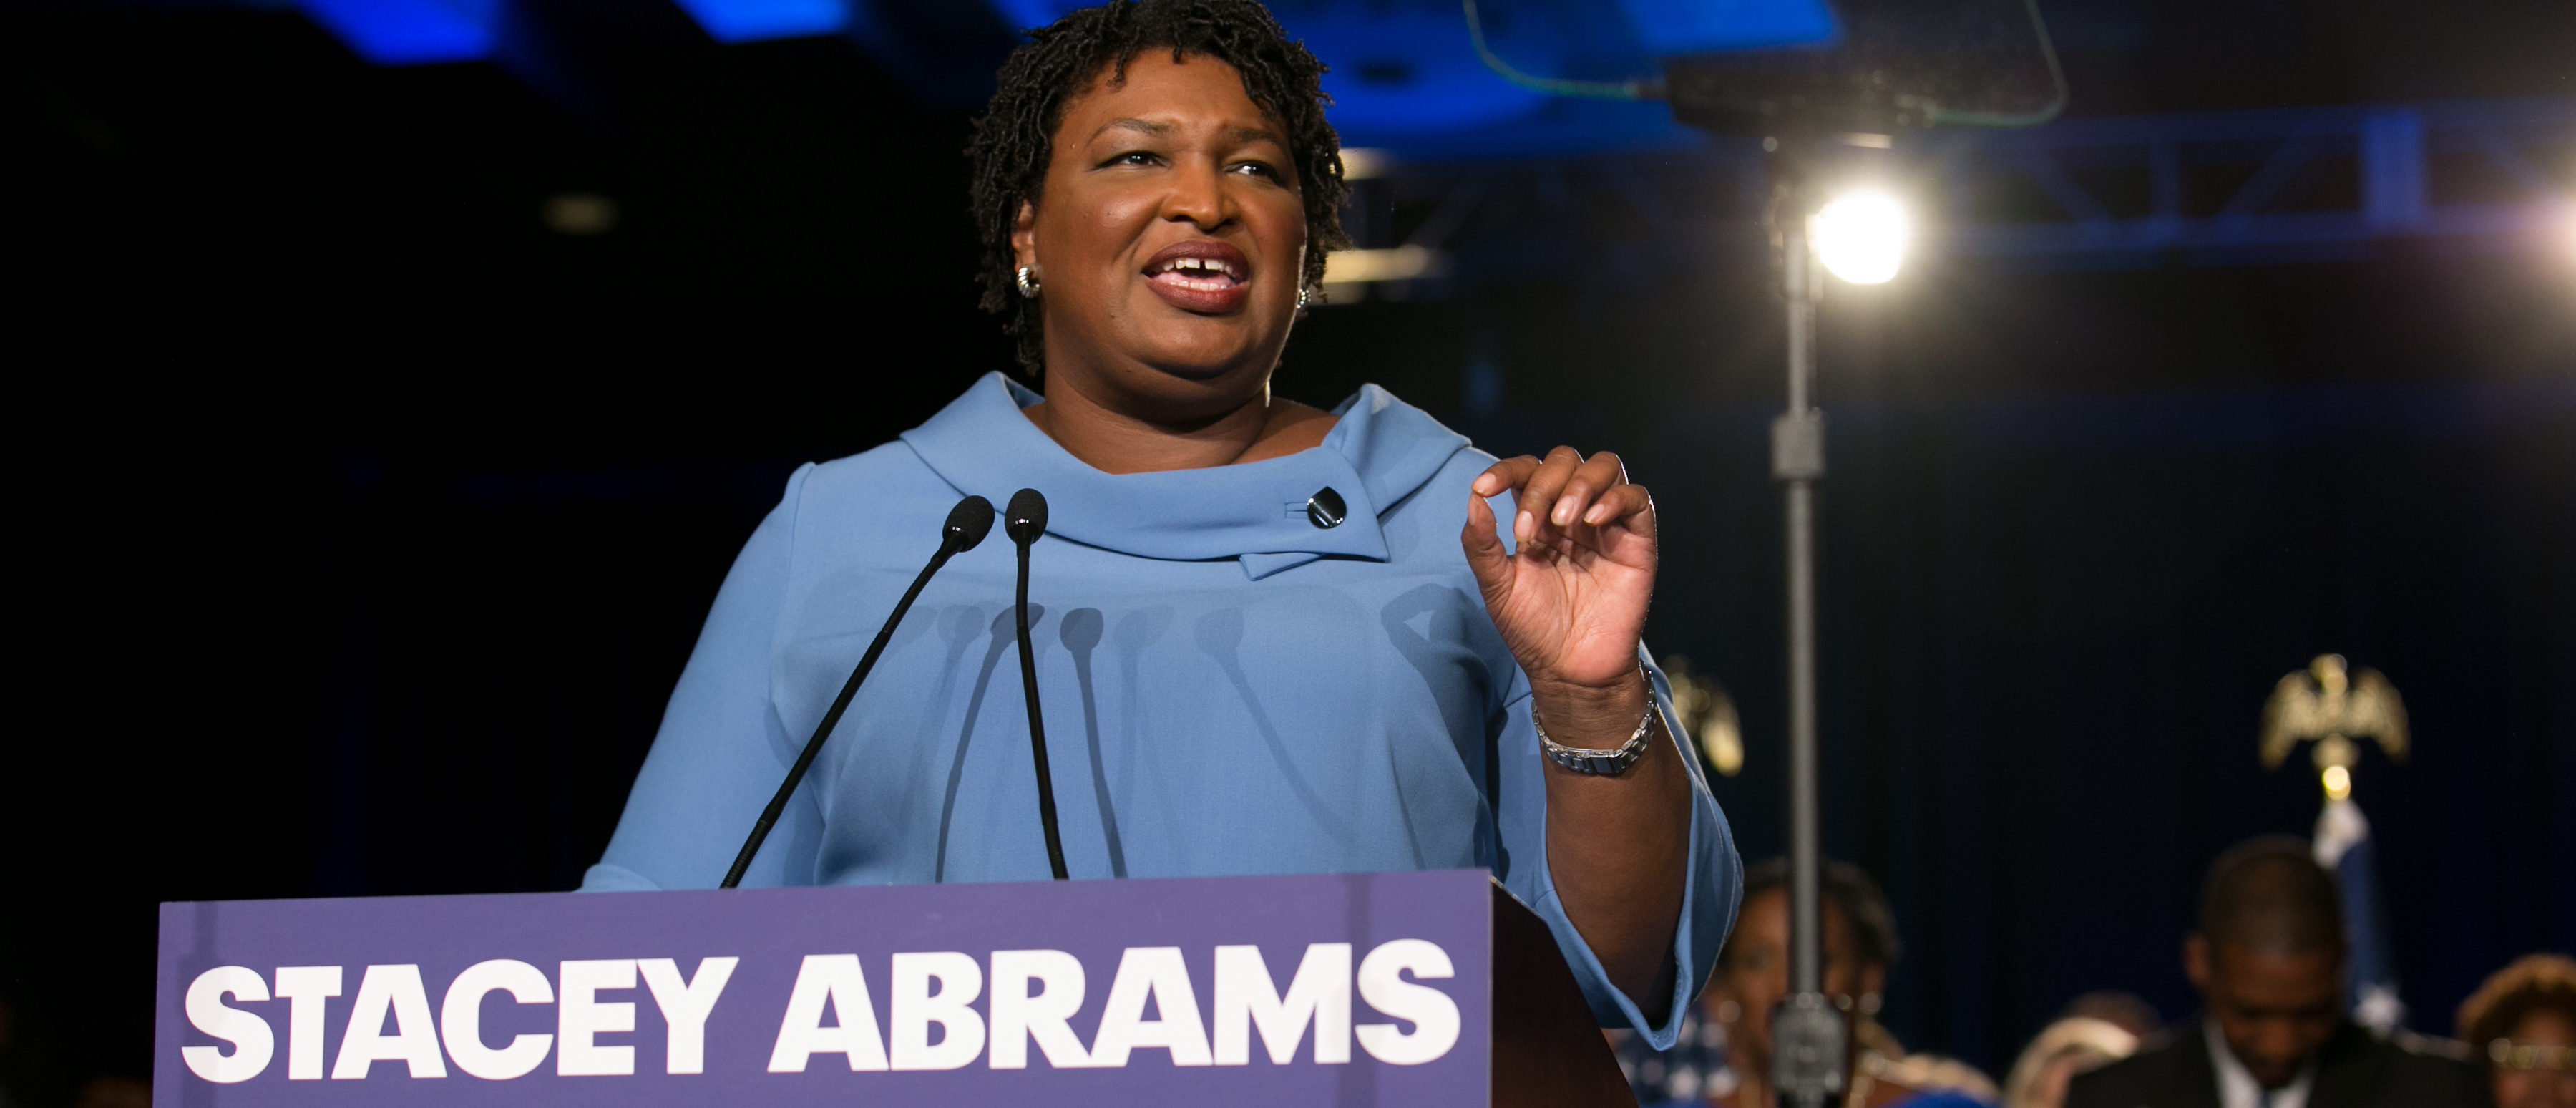 Georgia Democratic Gubernatorial Candidate Stacey Abrams Holds Election Night Event In Atlanta (Photo by Jessica McGowan/Getty Images)